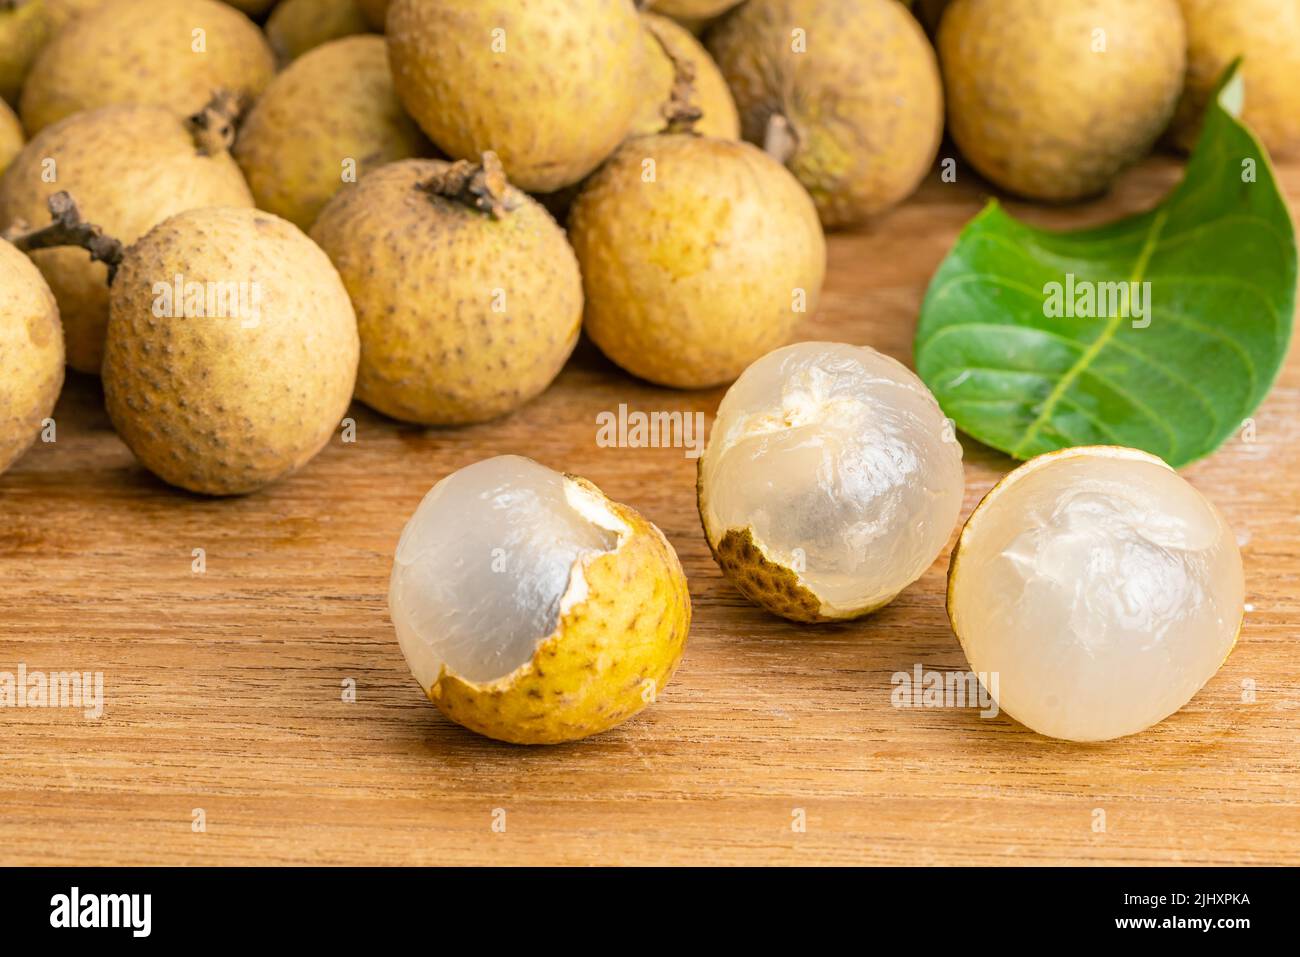 Closeup view of peeled longan and pile of the whole with green leaf on wooden table. Stock Photo